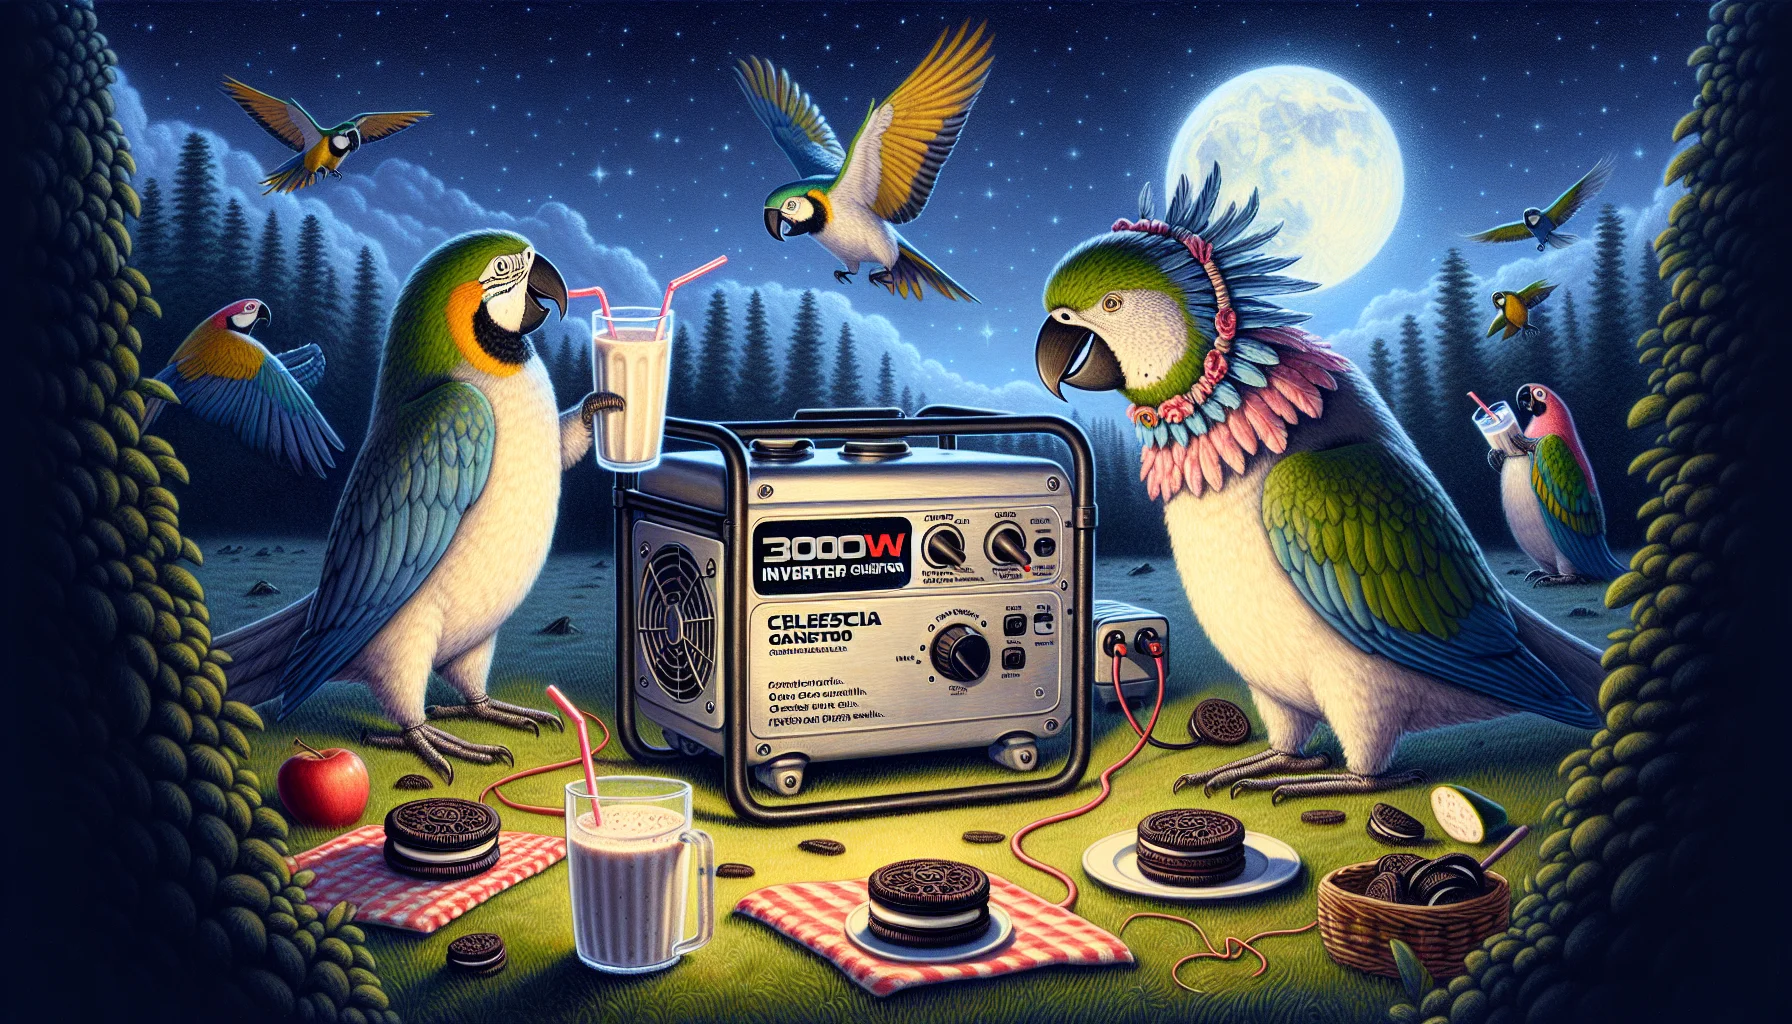 Create an engaging and humorous image showcasing a 3000w inverter generator. Picture this unfolding scene: a group of Celestial Parrots have brought their Oreo milkshakes to a moonlit, open field picnic. Unexpectedly, the celestial radio player goes quiet. One of the parrots waddles over to a shiny 3000w inverter generator which is as befittingly adorned with feathers as any parrot. With a funny struggle, the parrot startles the generator to life, and the celestial radio tunes back in, playing melodic tunes. The scene is painted in mirthful light, subtly making a note of the power in generating one's own electricity.